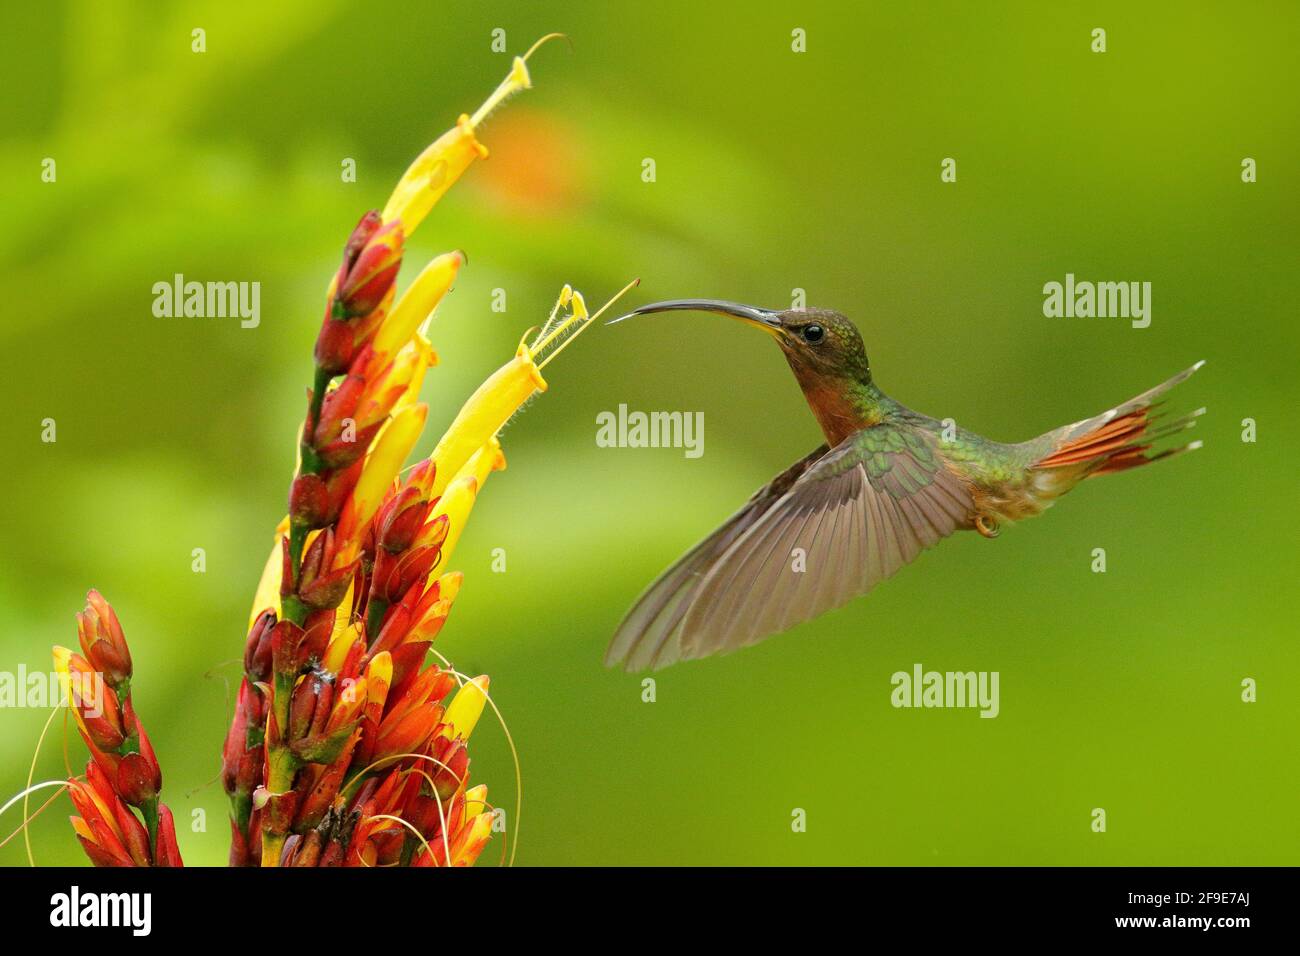 Rrufous-breasted hairy hermit, Glaucis hirsutus,  hummingbird from Trinidad and Tobago. Green bird flying next to beautiful red flower in jungle. Acti Stock Photo